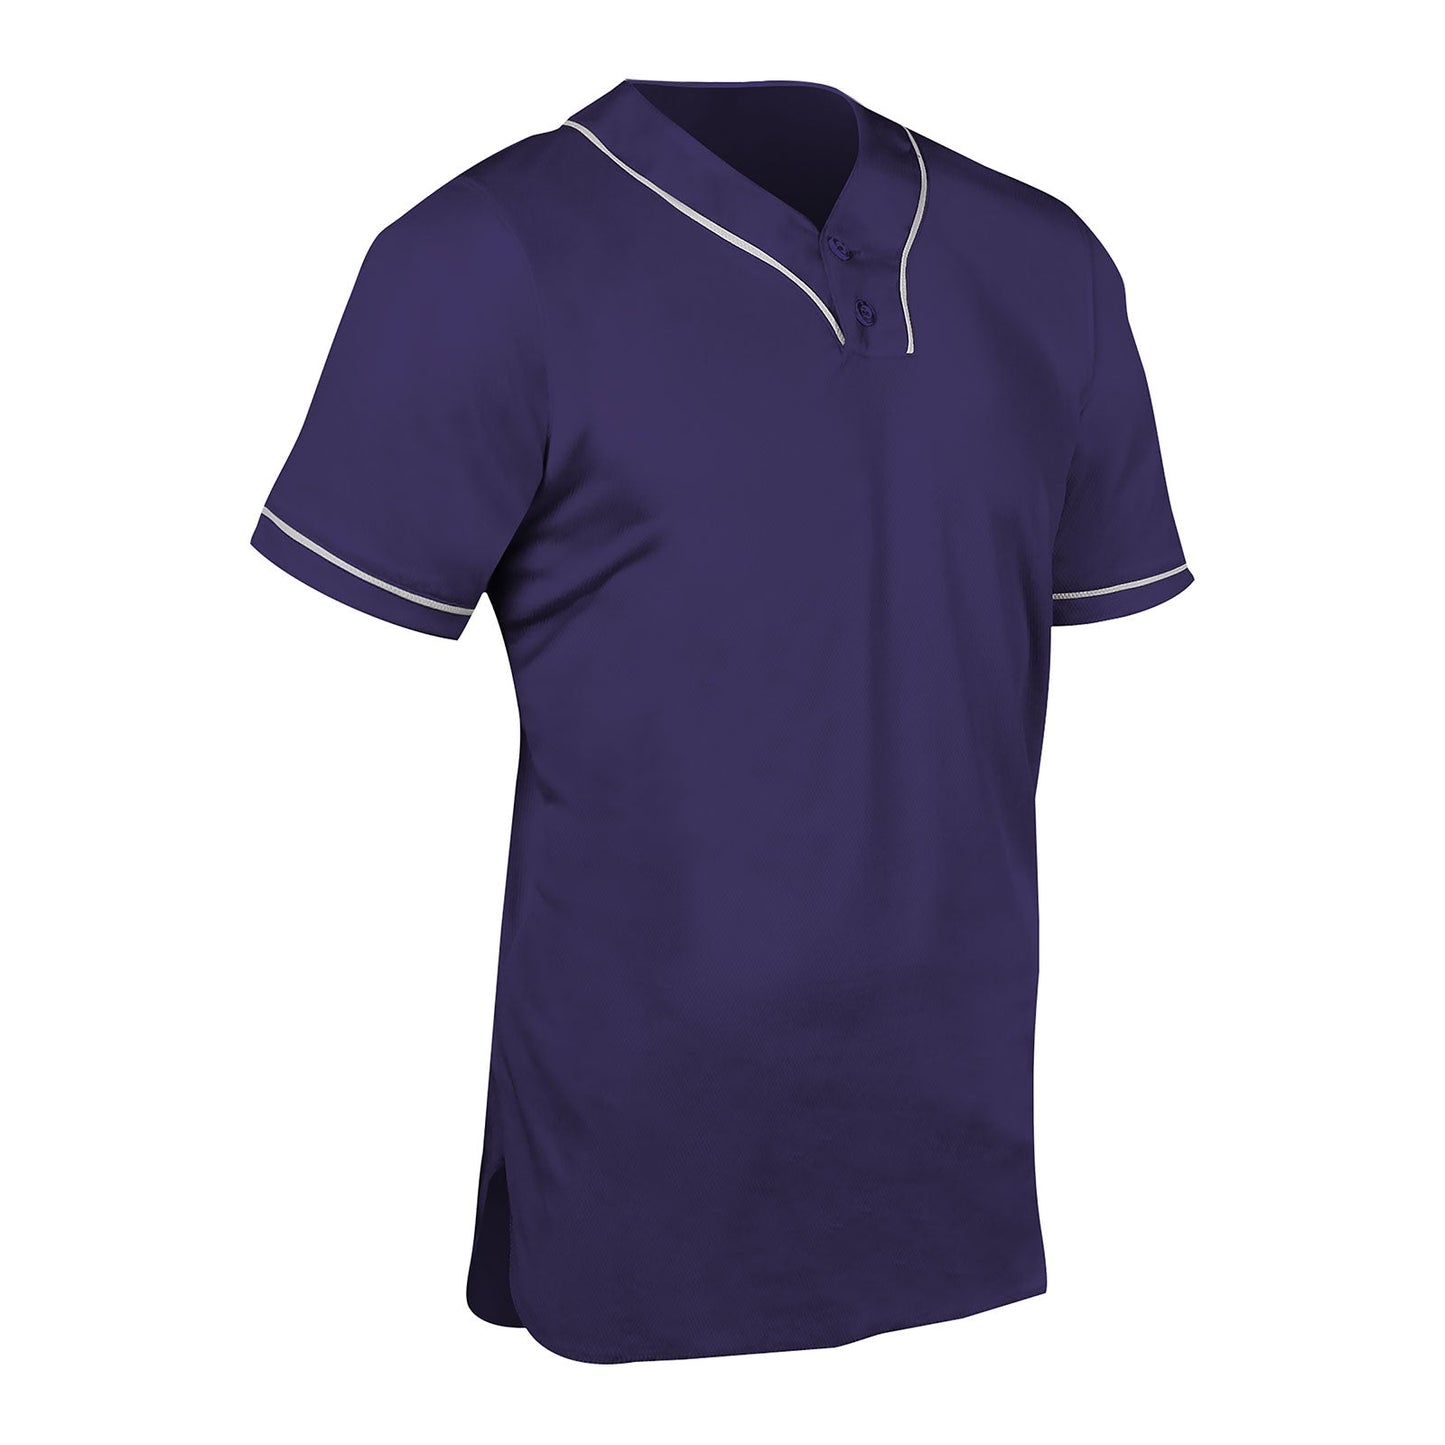 Heater 2-Button Piped Baseball Jersey PURPLE BODY, WHITE PIPE